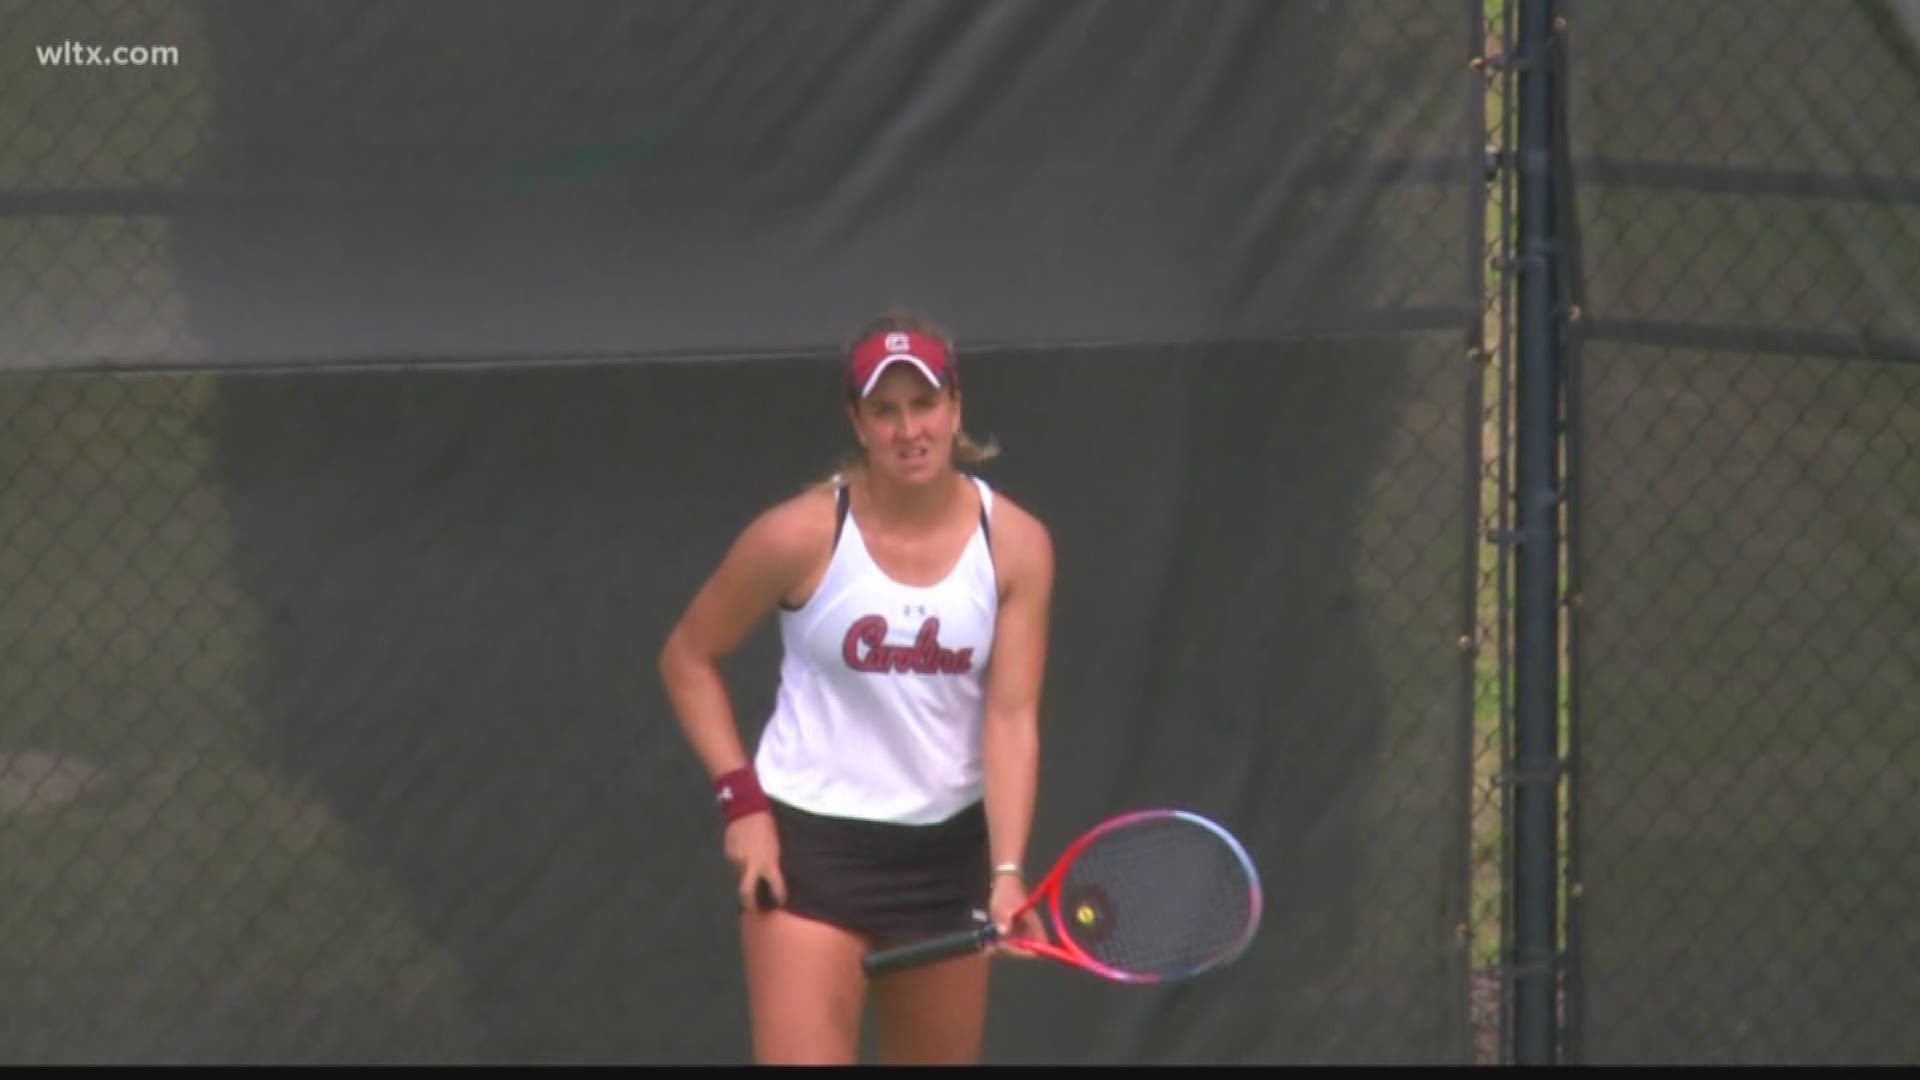 The USC women's tennis team remains unbeaten in the SEC with Friday's 4-1 win over Tennessee.